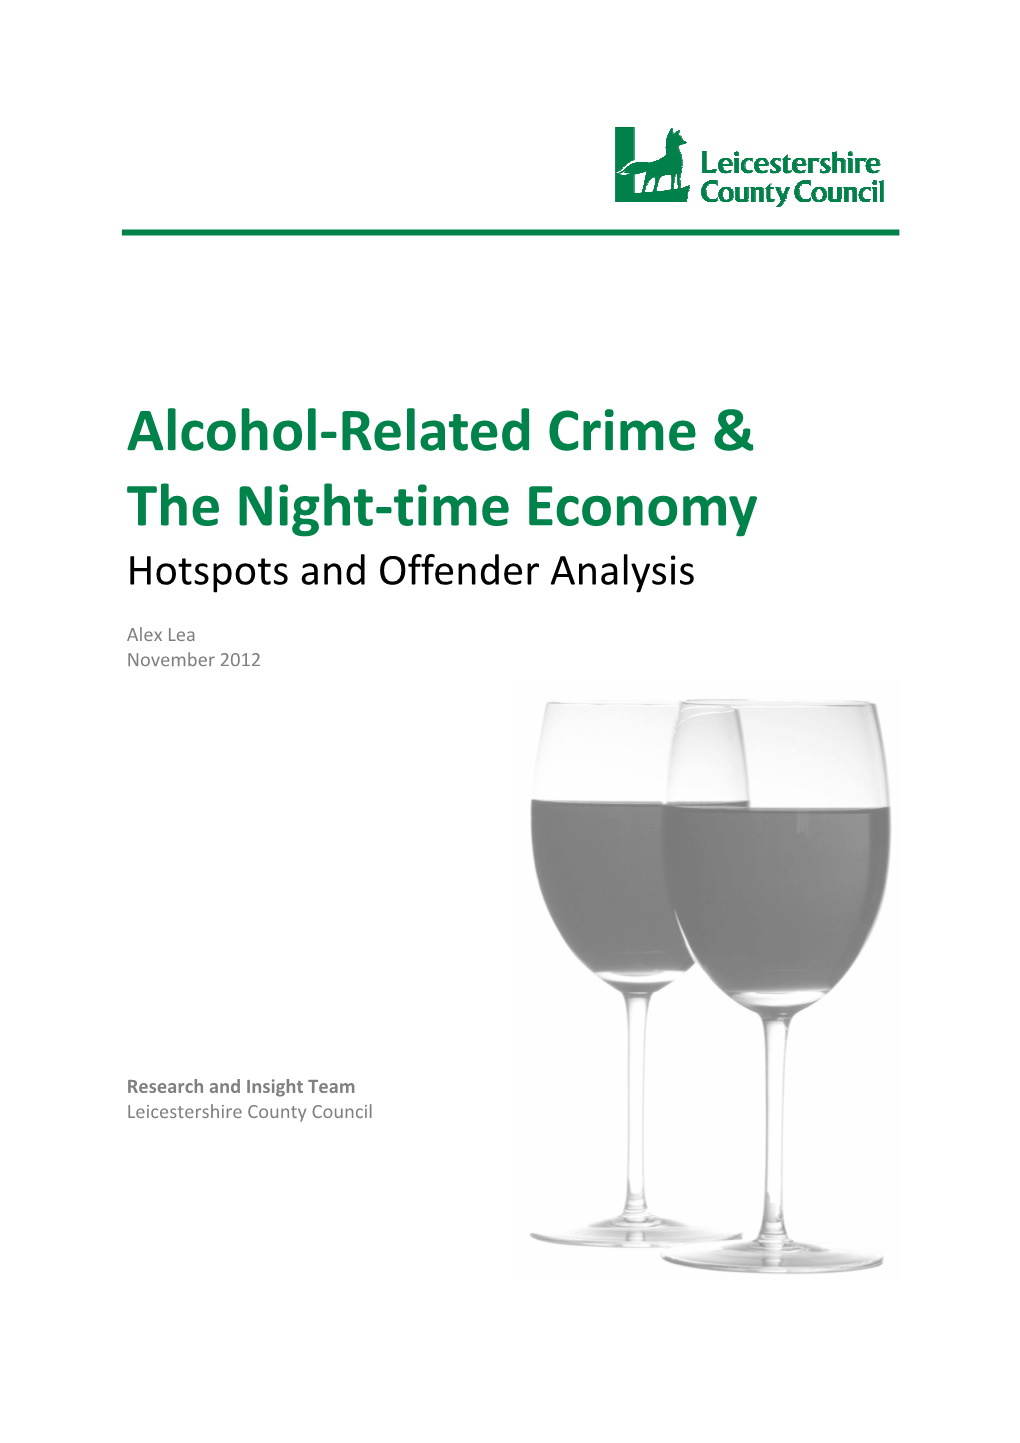 Alcohol‐Related Crime & the Night‐Time Economy